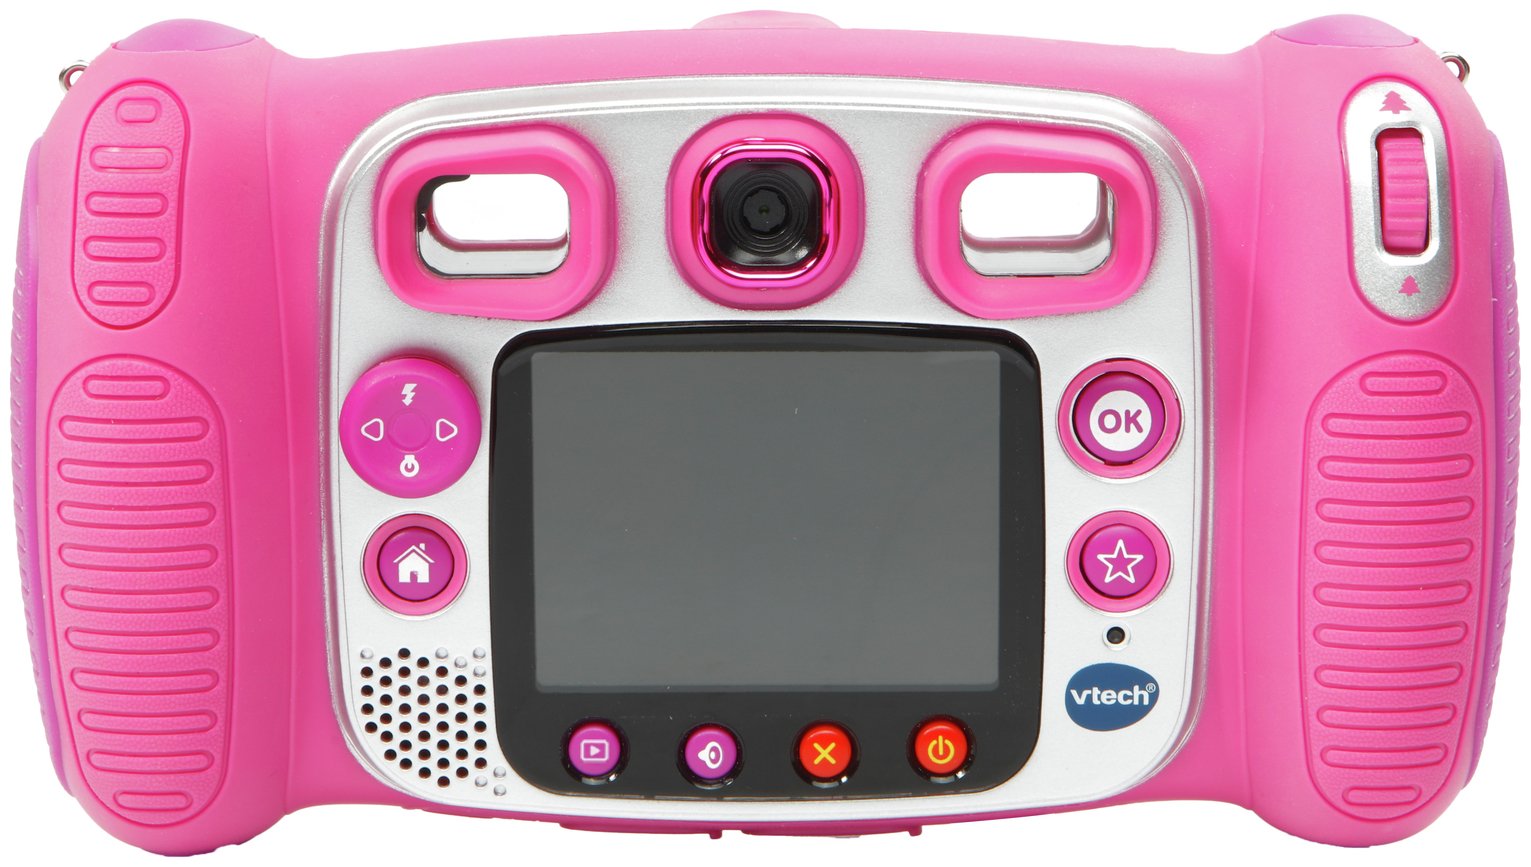 VTech Kidizoom Duo Camera 5.0 MP Pink for sale online 